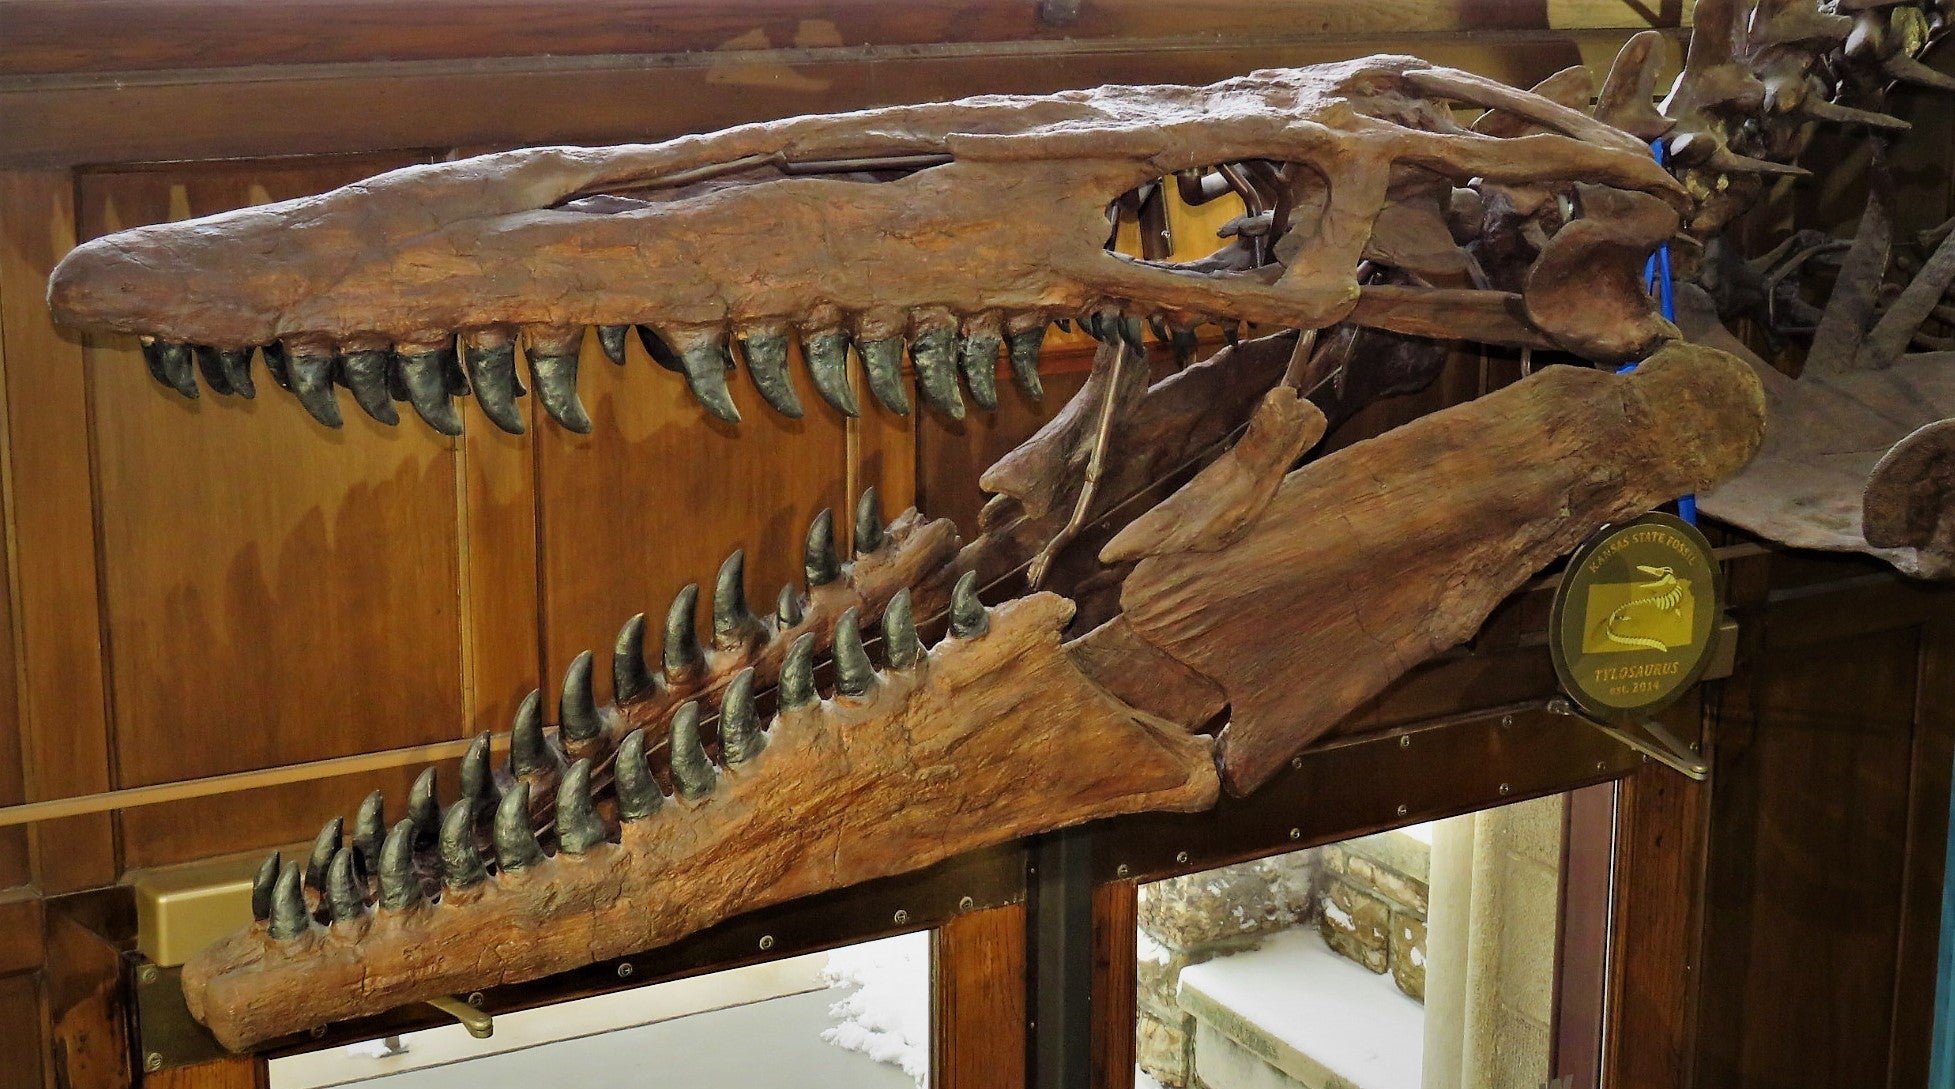 Cast of a mosasaur skull housed at the Natural History Museum of the University of Kansas. (Photo: Amelia Zietlow)